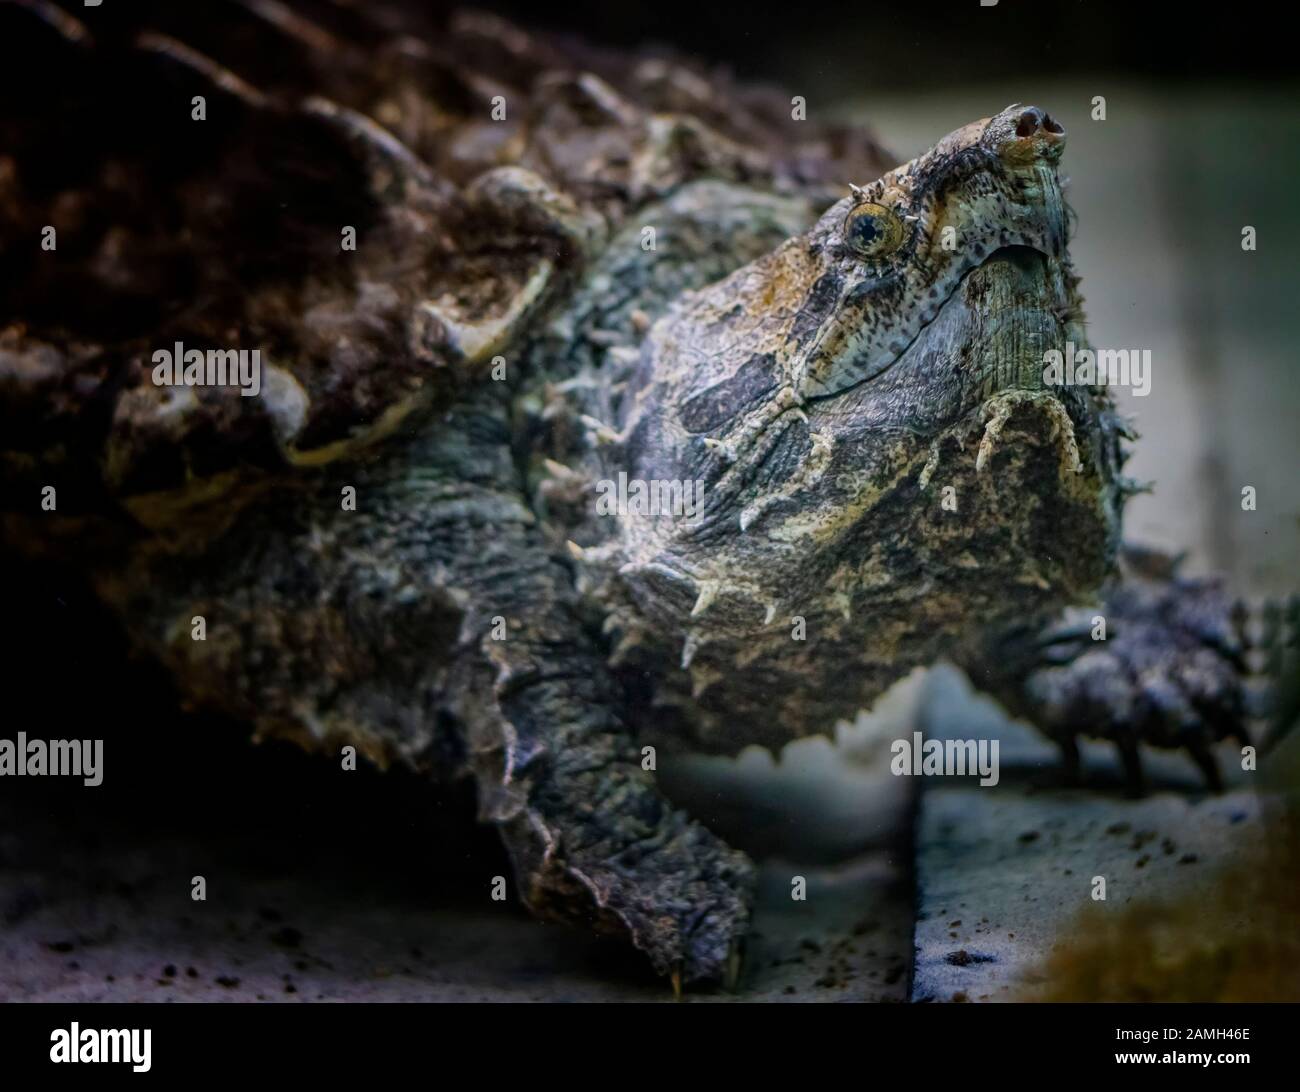 The alligator snapping turtle Macrochelys temminckii is a species of turtle in the family Chelydridae. Stock Photo